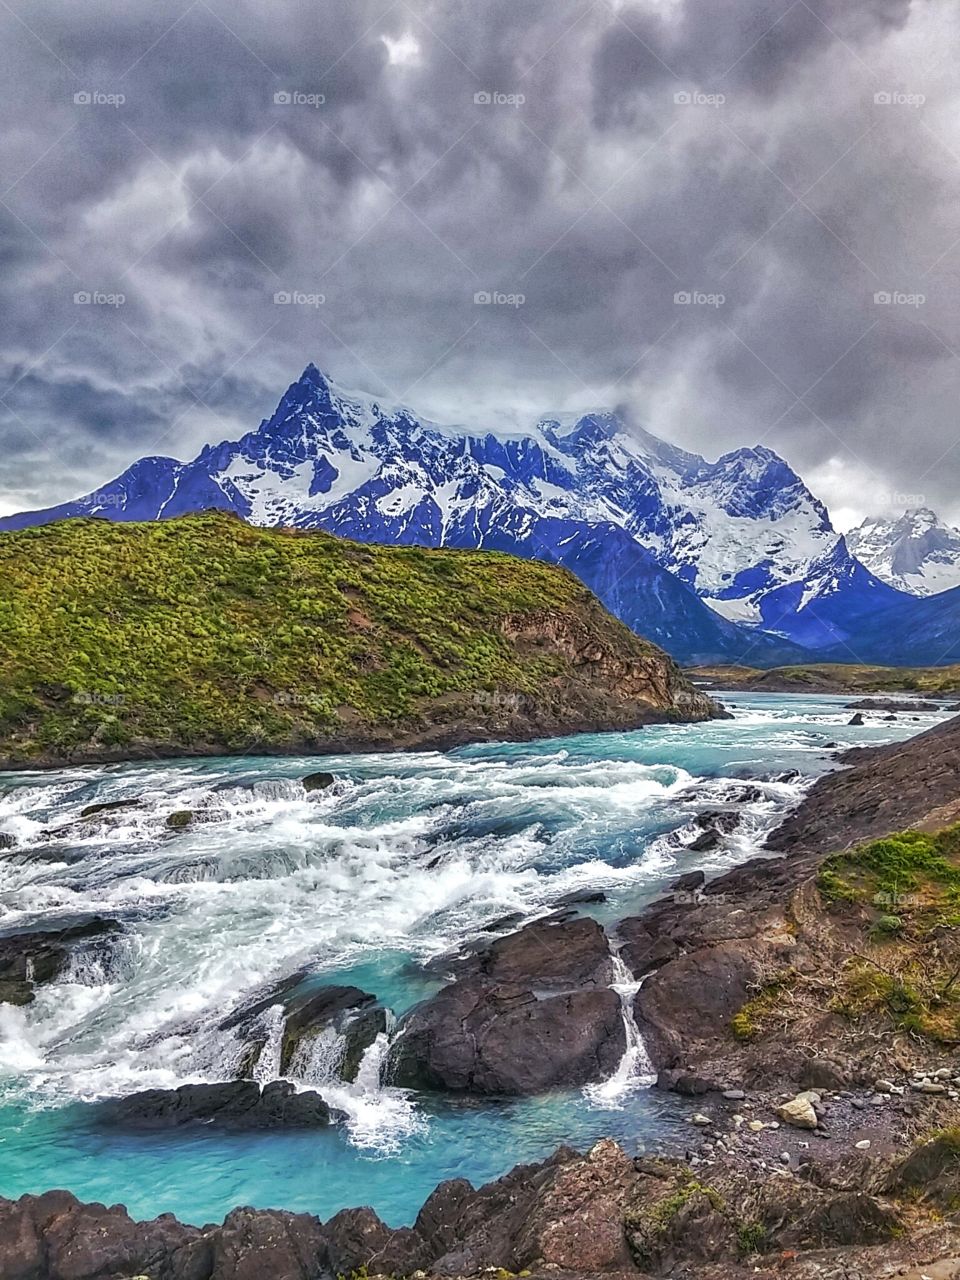 Torres del Paine - Patagônia. One of the amazing places in the South America is Patagônia Chile/Argentina.